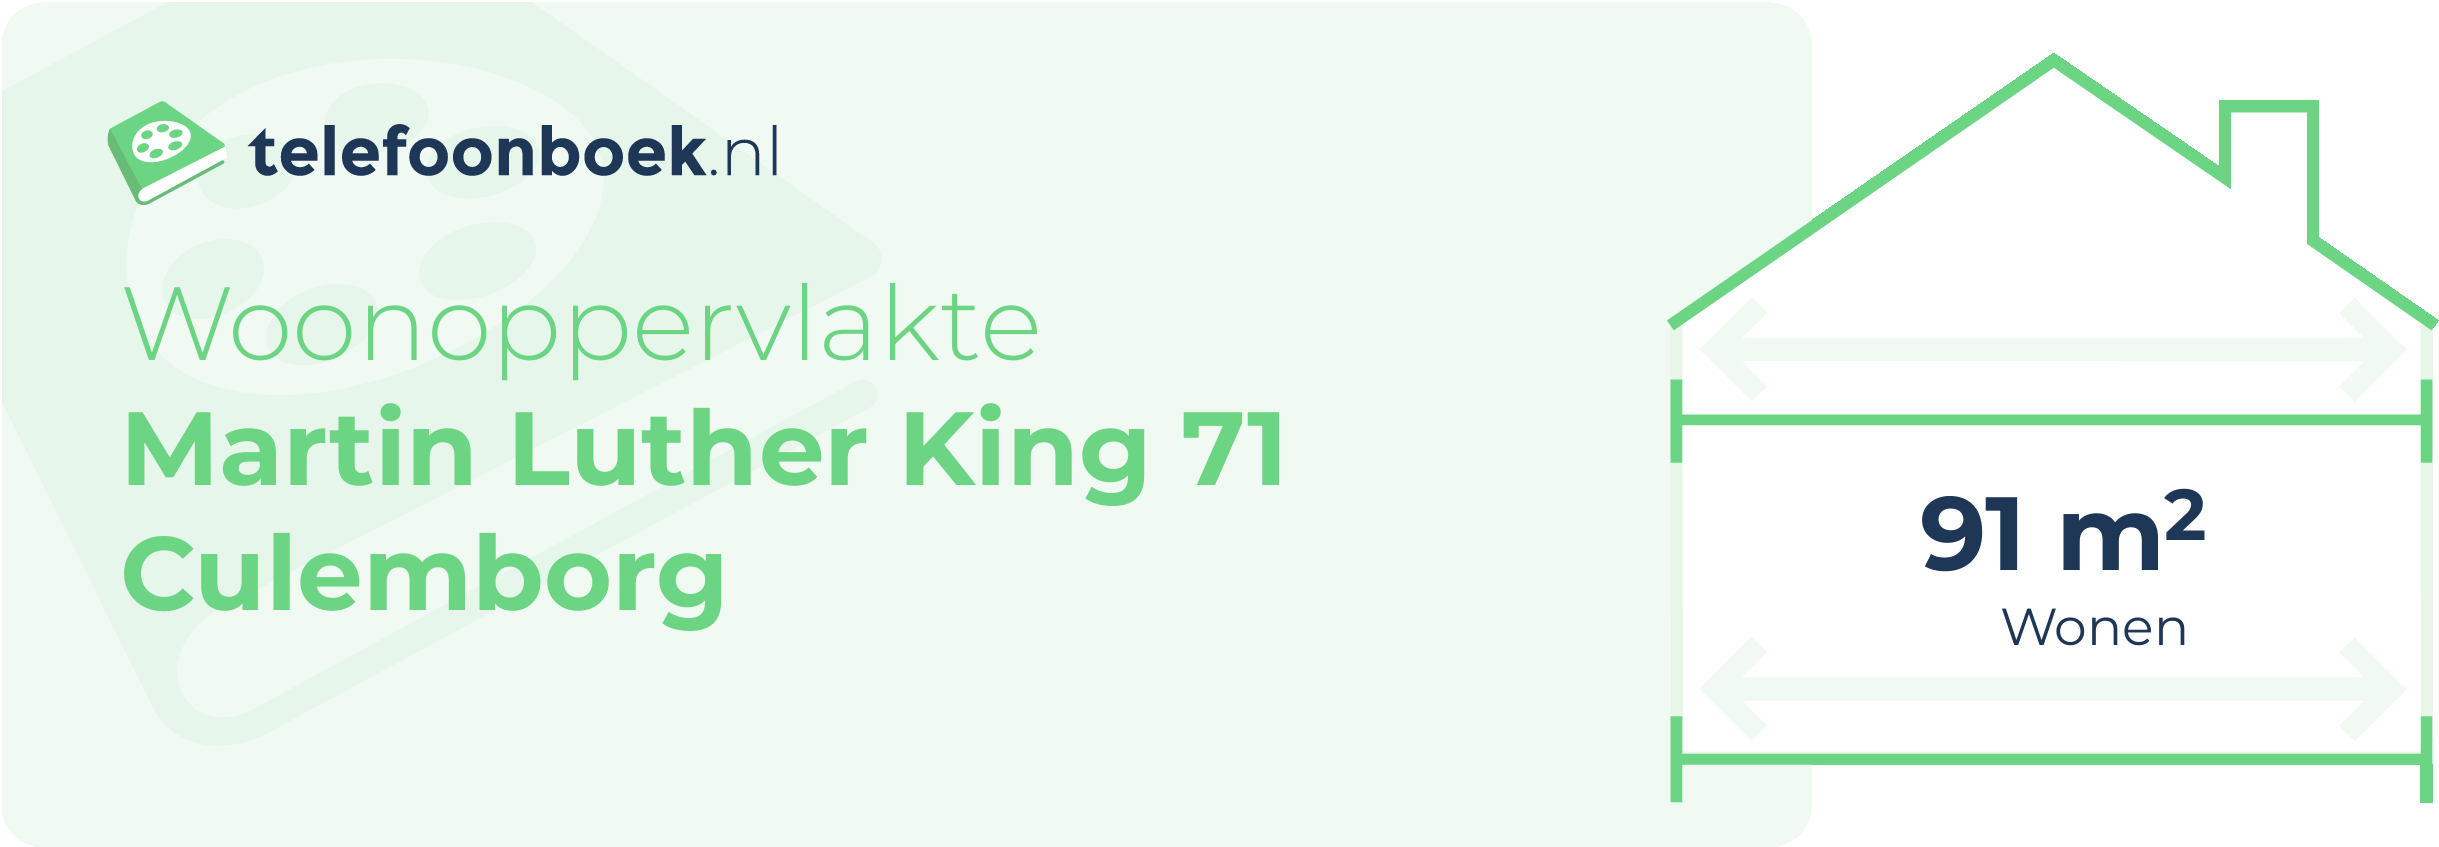 Woonoppervlakte Martin Luther King 71 Culemborg